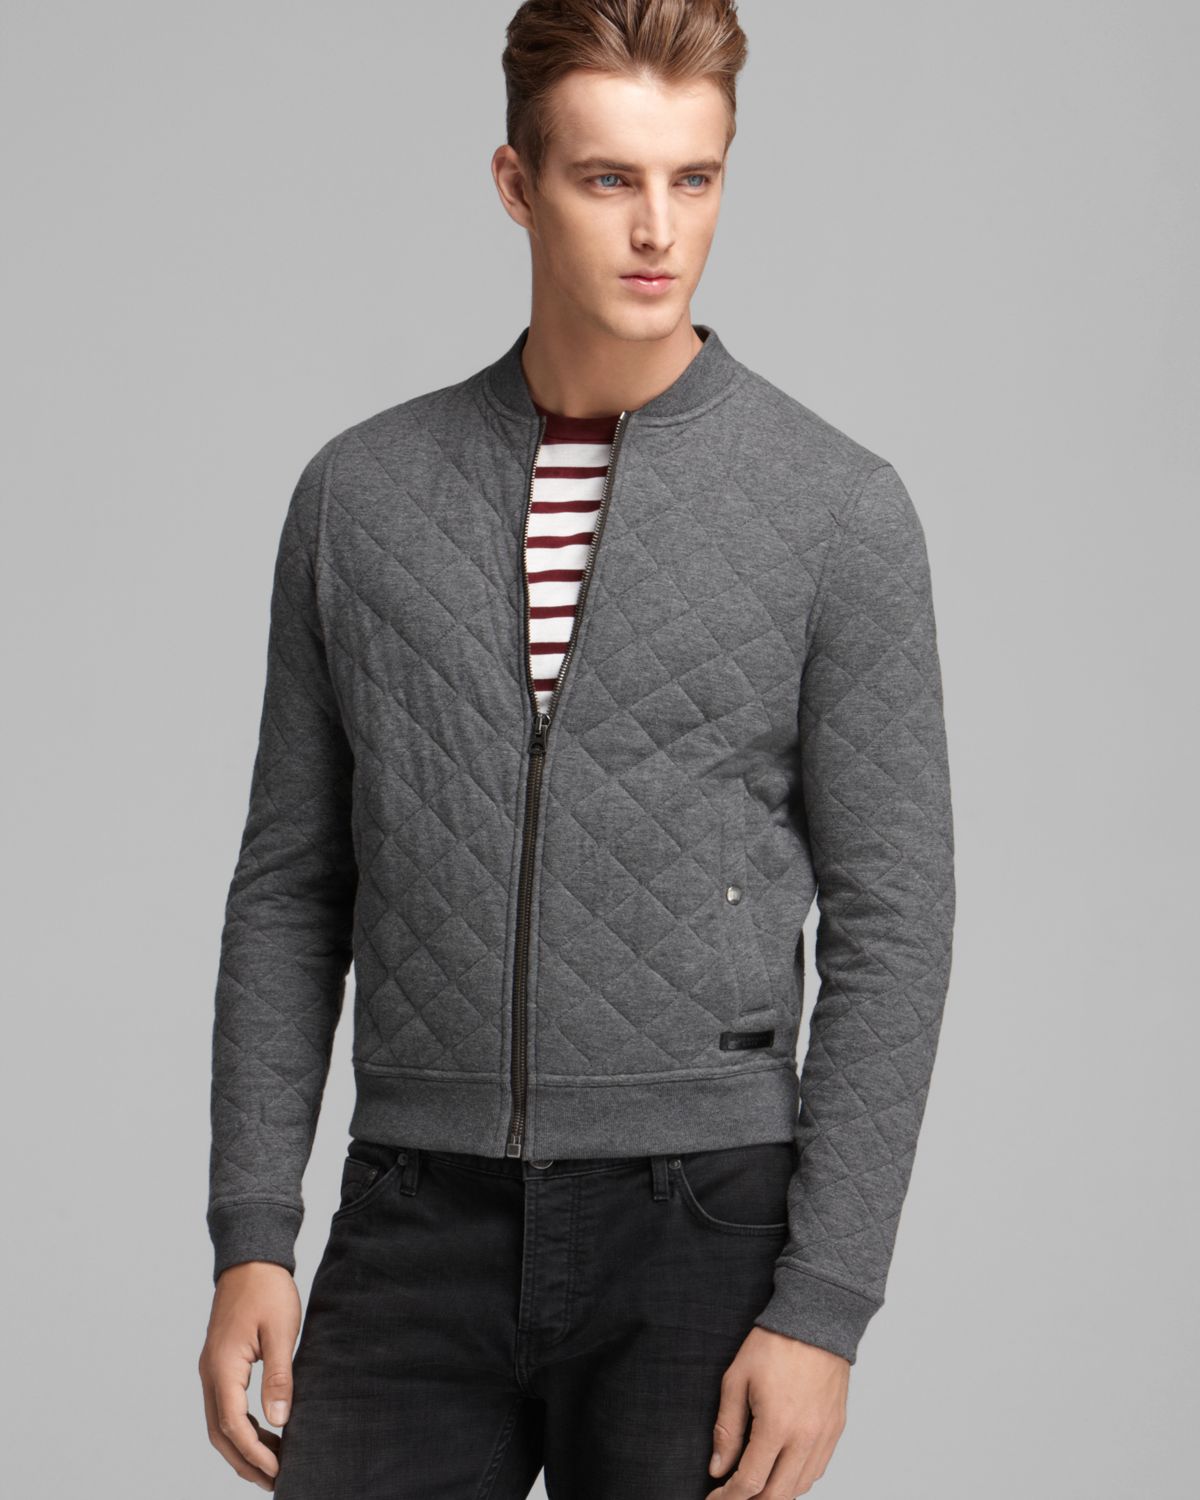 Lyst - Burberry Brit Marvel Quilted Cotton Bomber Jacket in Gray for Men